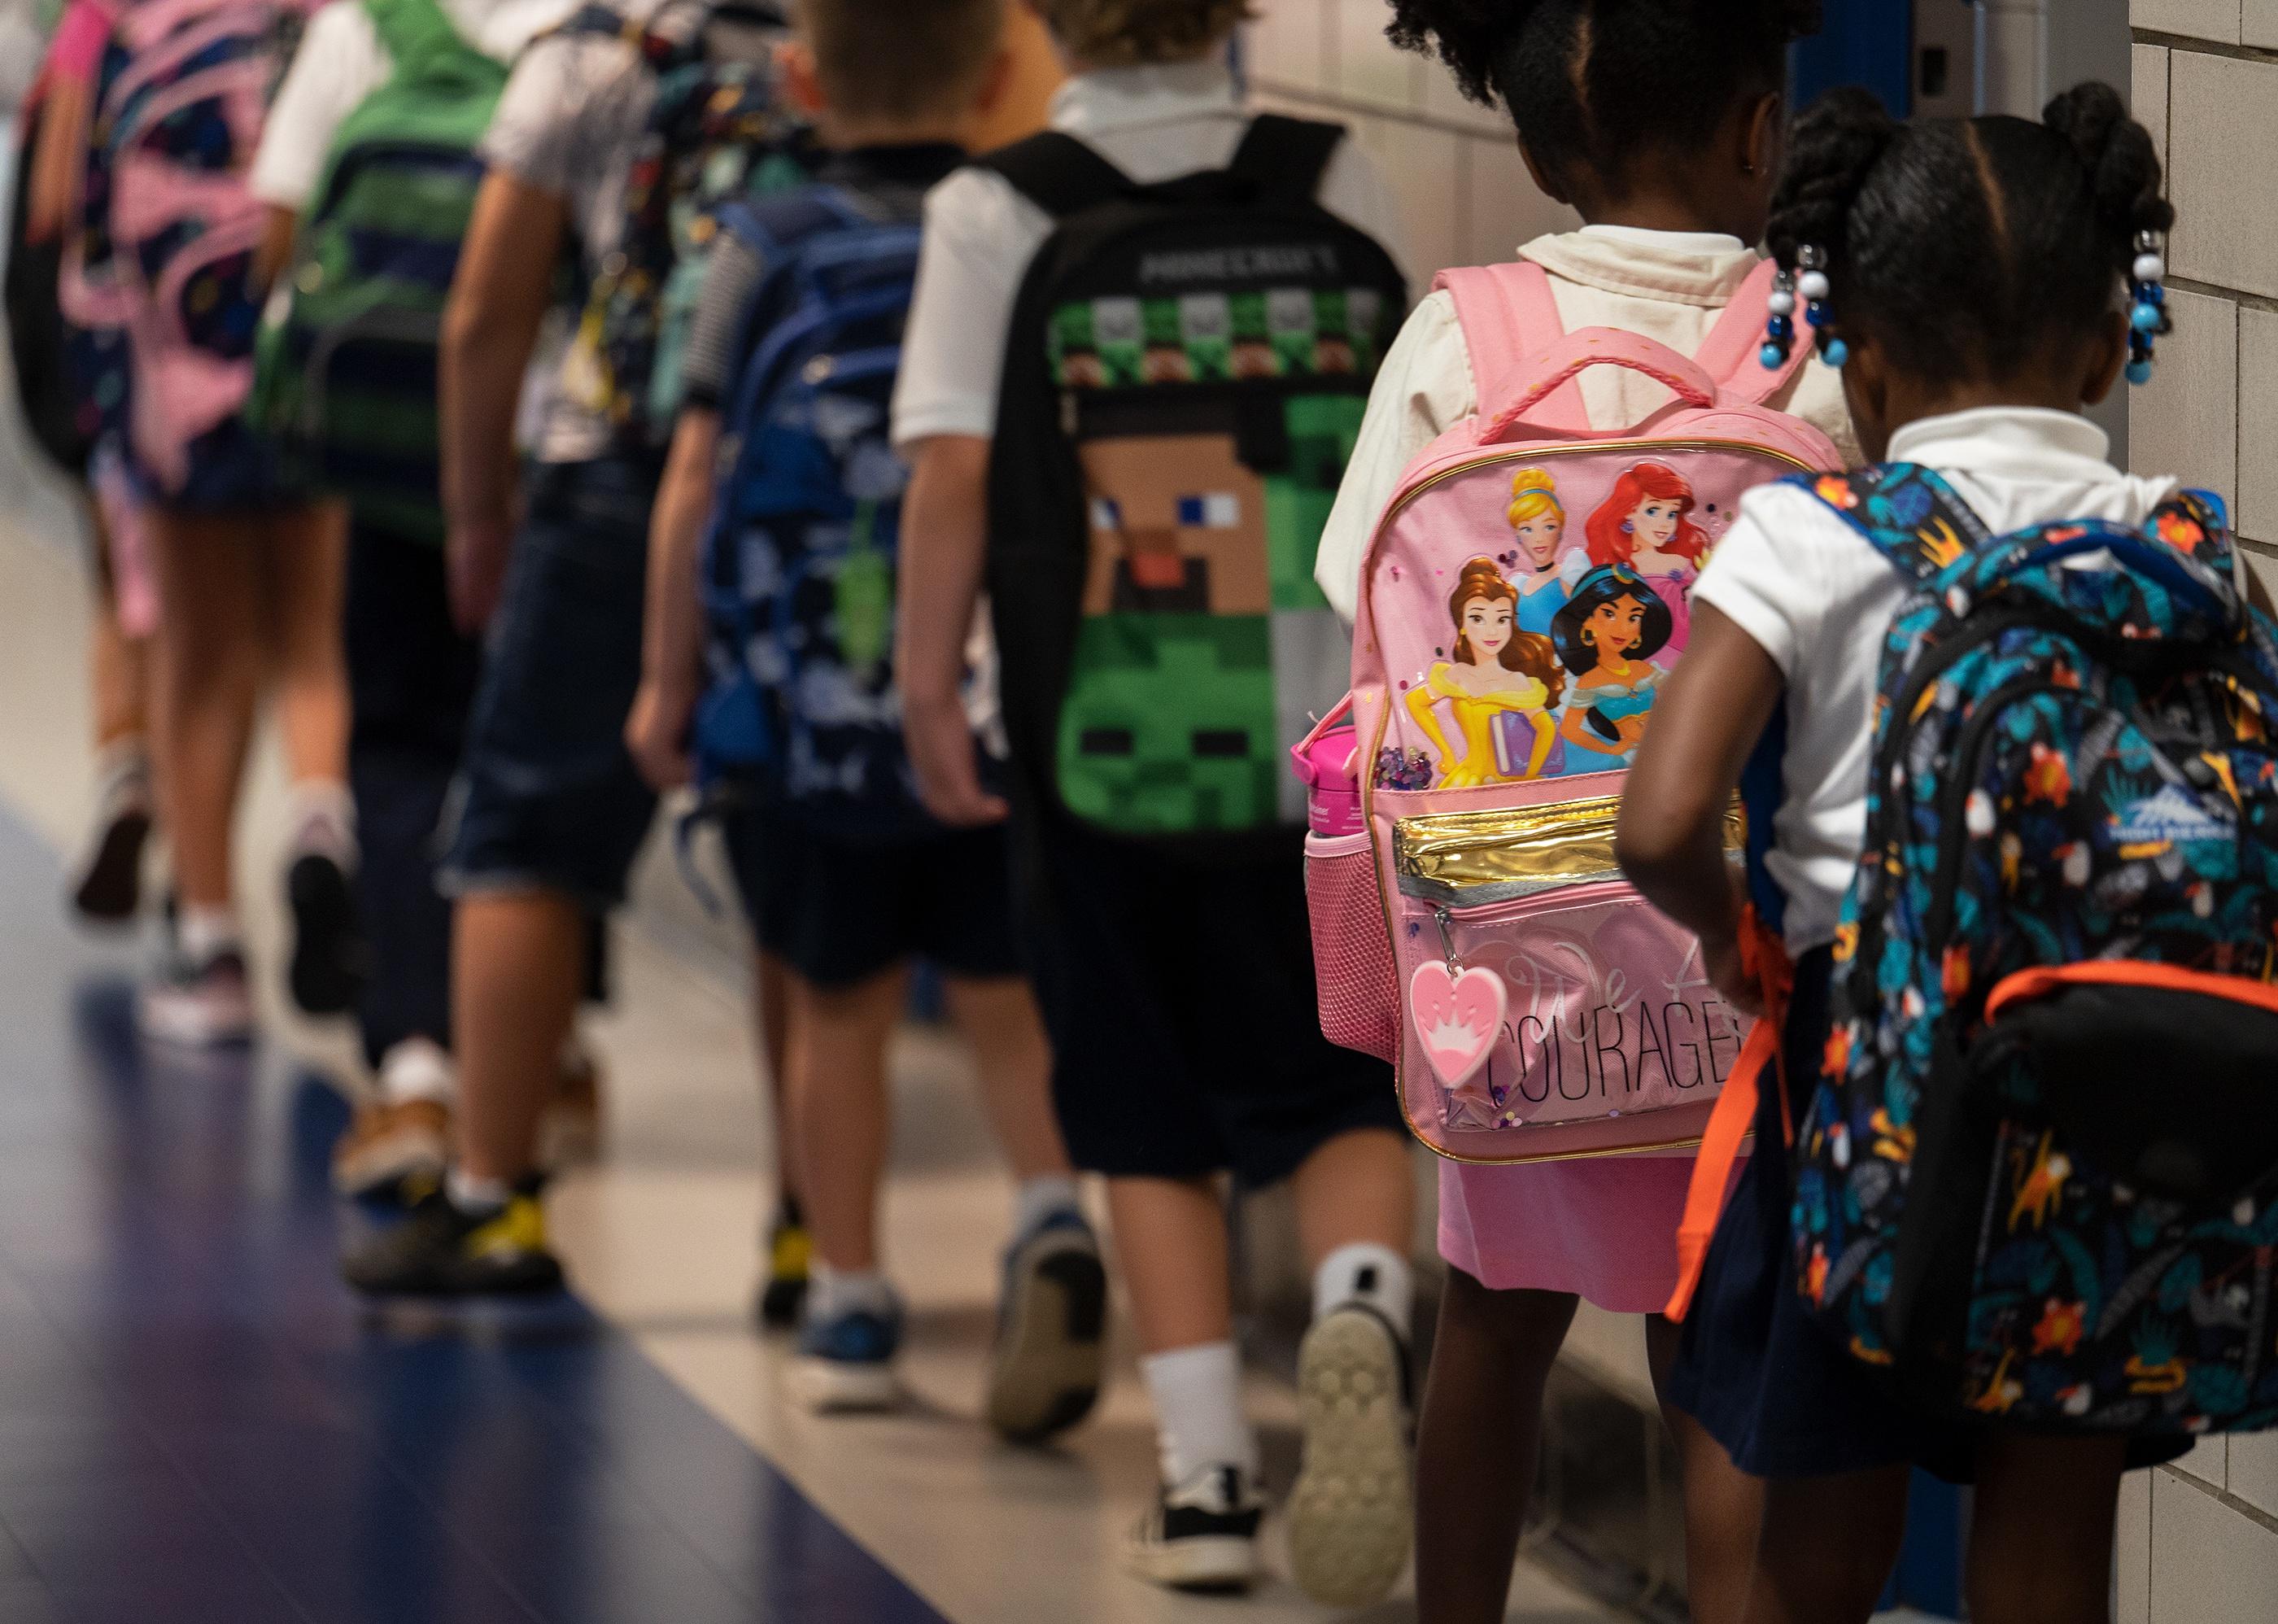 A line of kindergarten students wearing backpacks stand in a hallway at school.